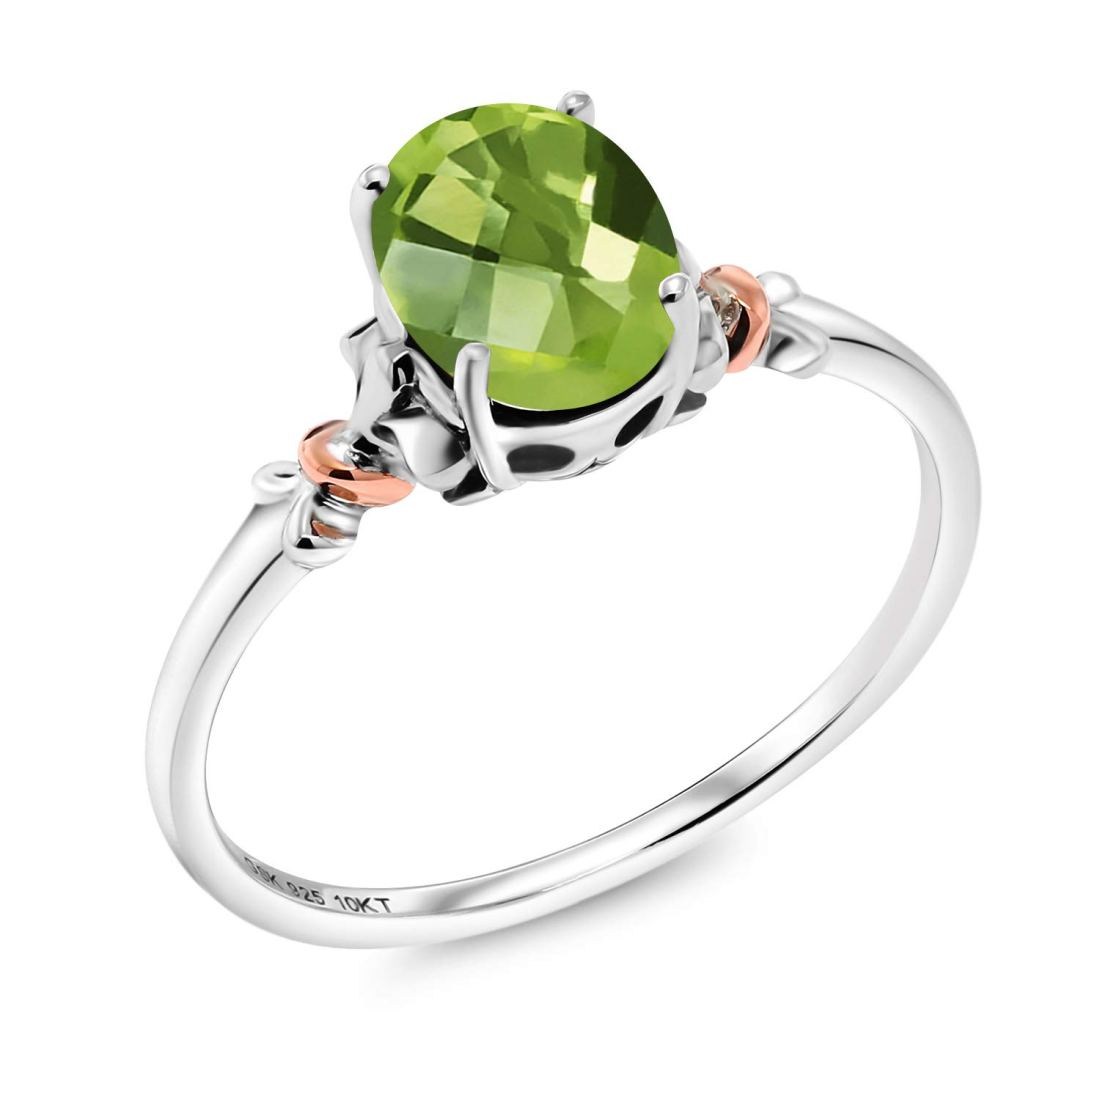 925 Sterling Silver and 10K Rose Gold Ring Oval Checkerboard Green Peridot 0.85 cttw (Available 5,6,7,8,9)